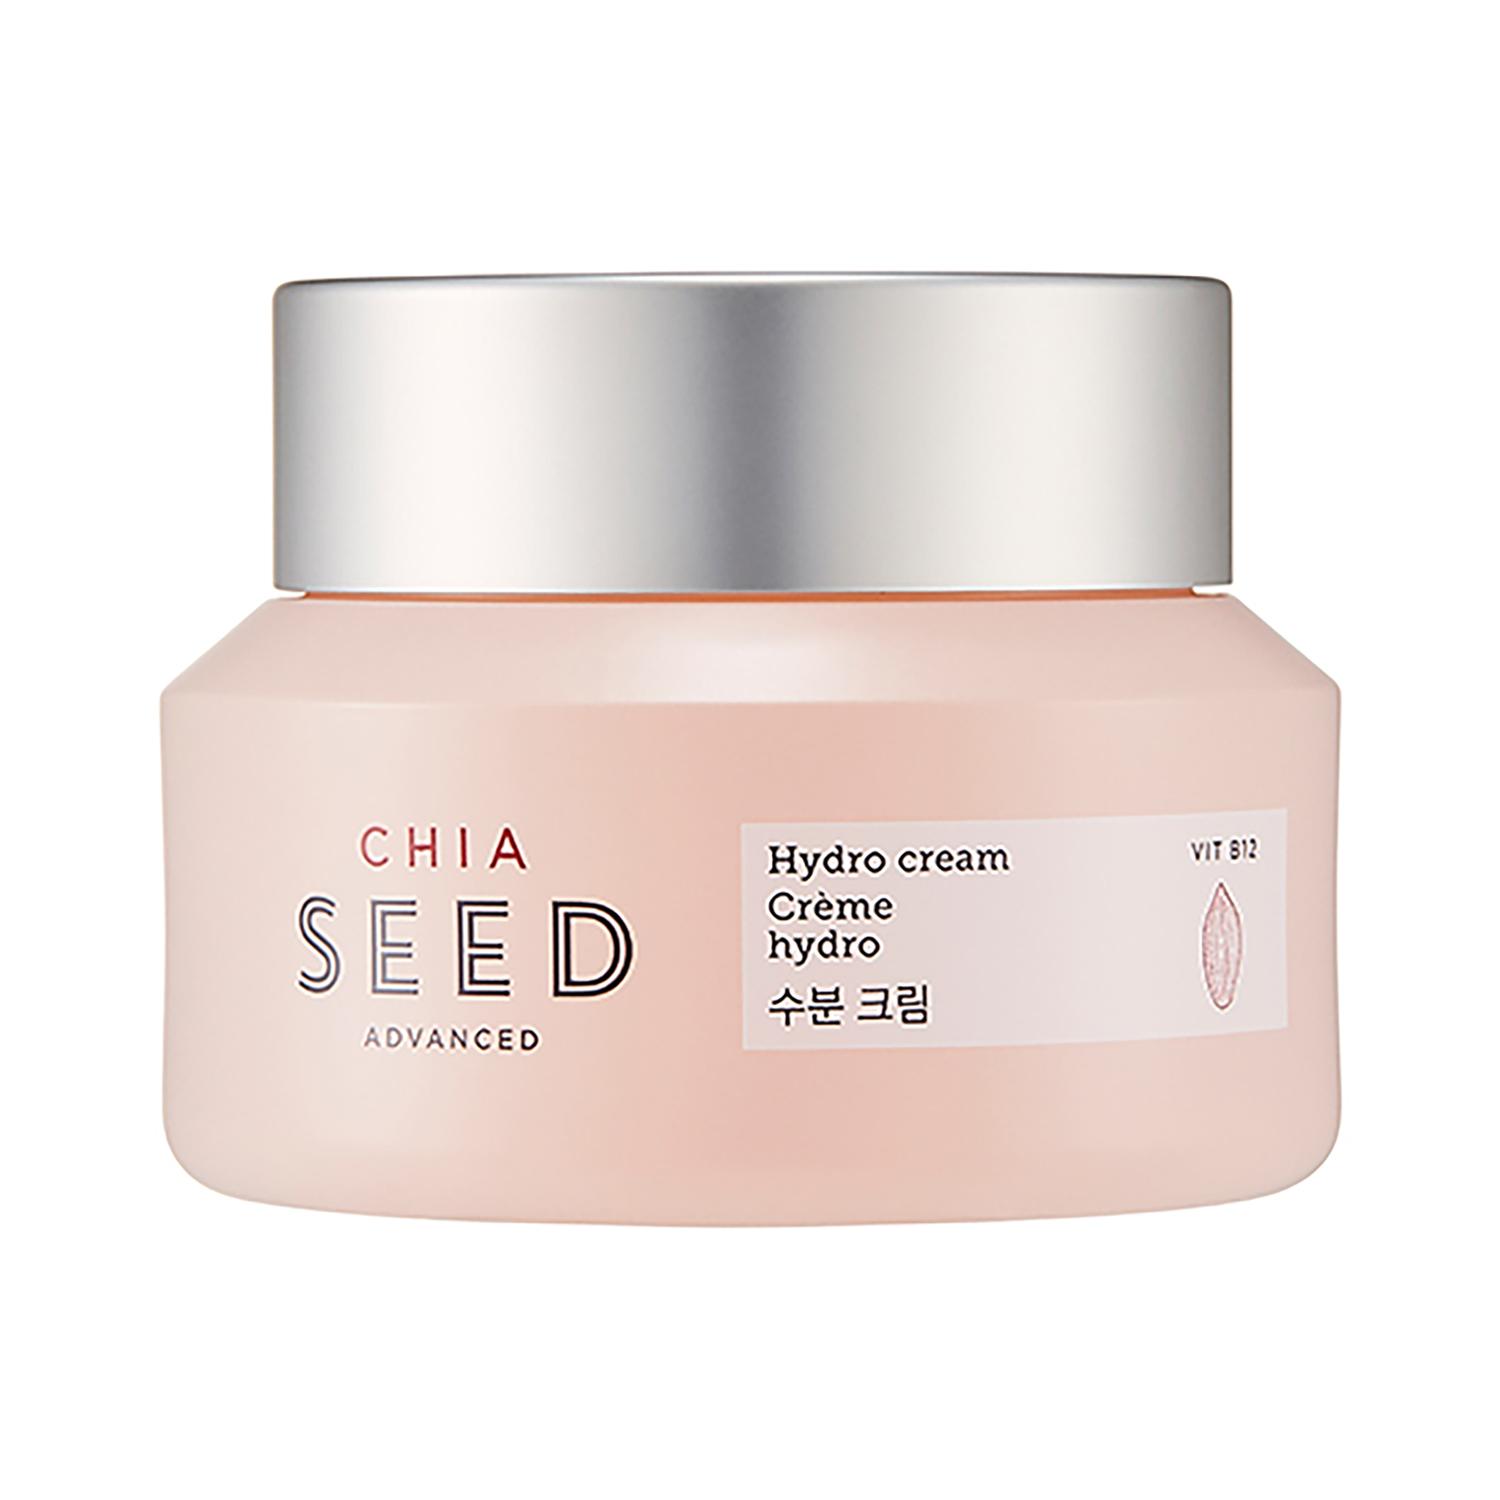 The Face Shop | The Face Shop Chia Seed Hydro Cream (25 ml)